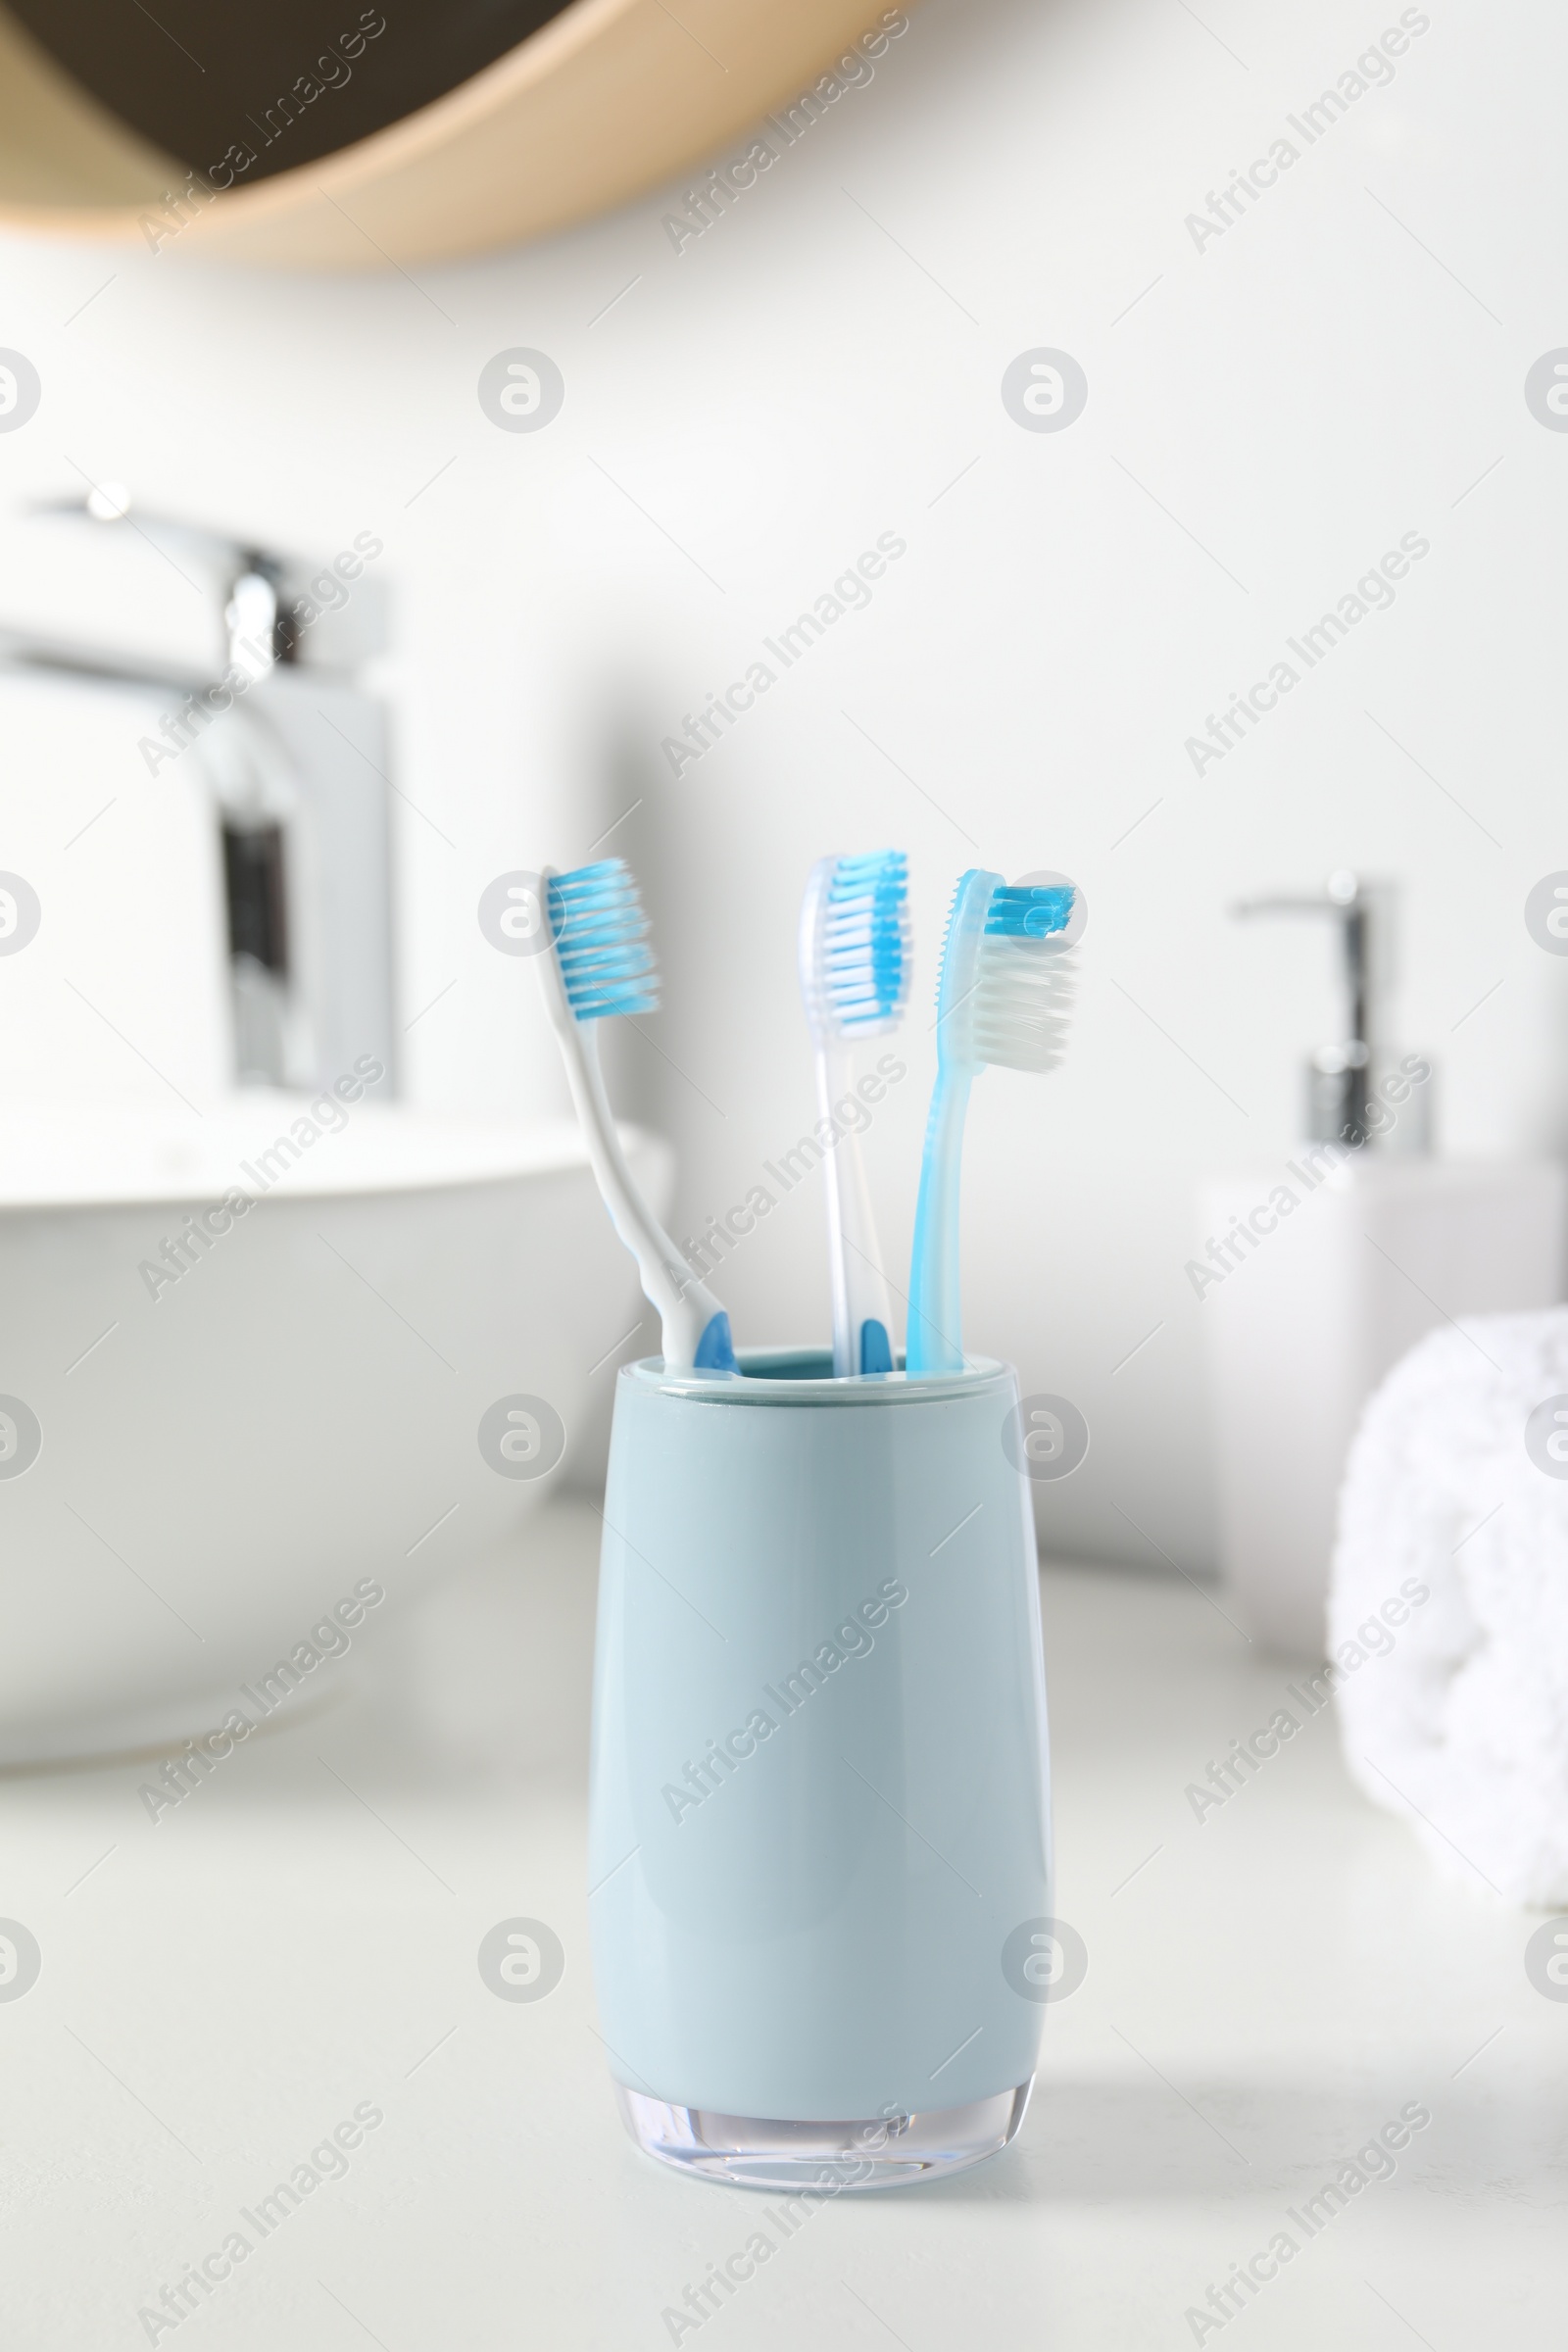 Photo of Holder with plastic toothbrushes on white countertop in bathroom